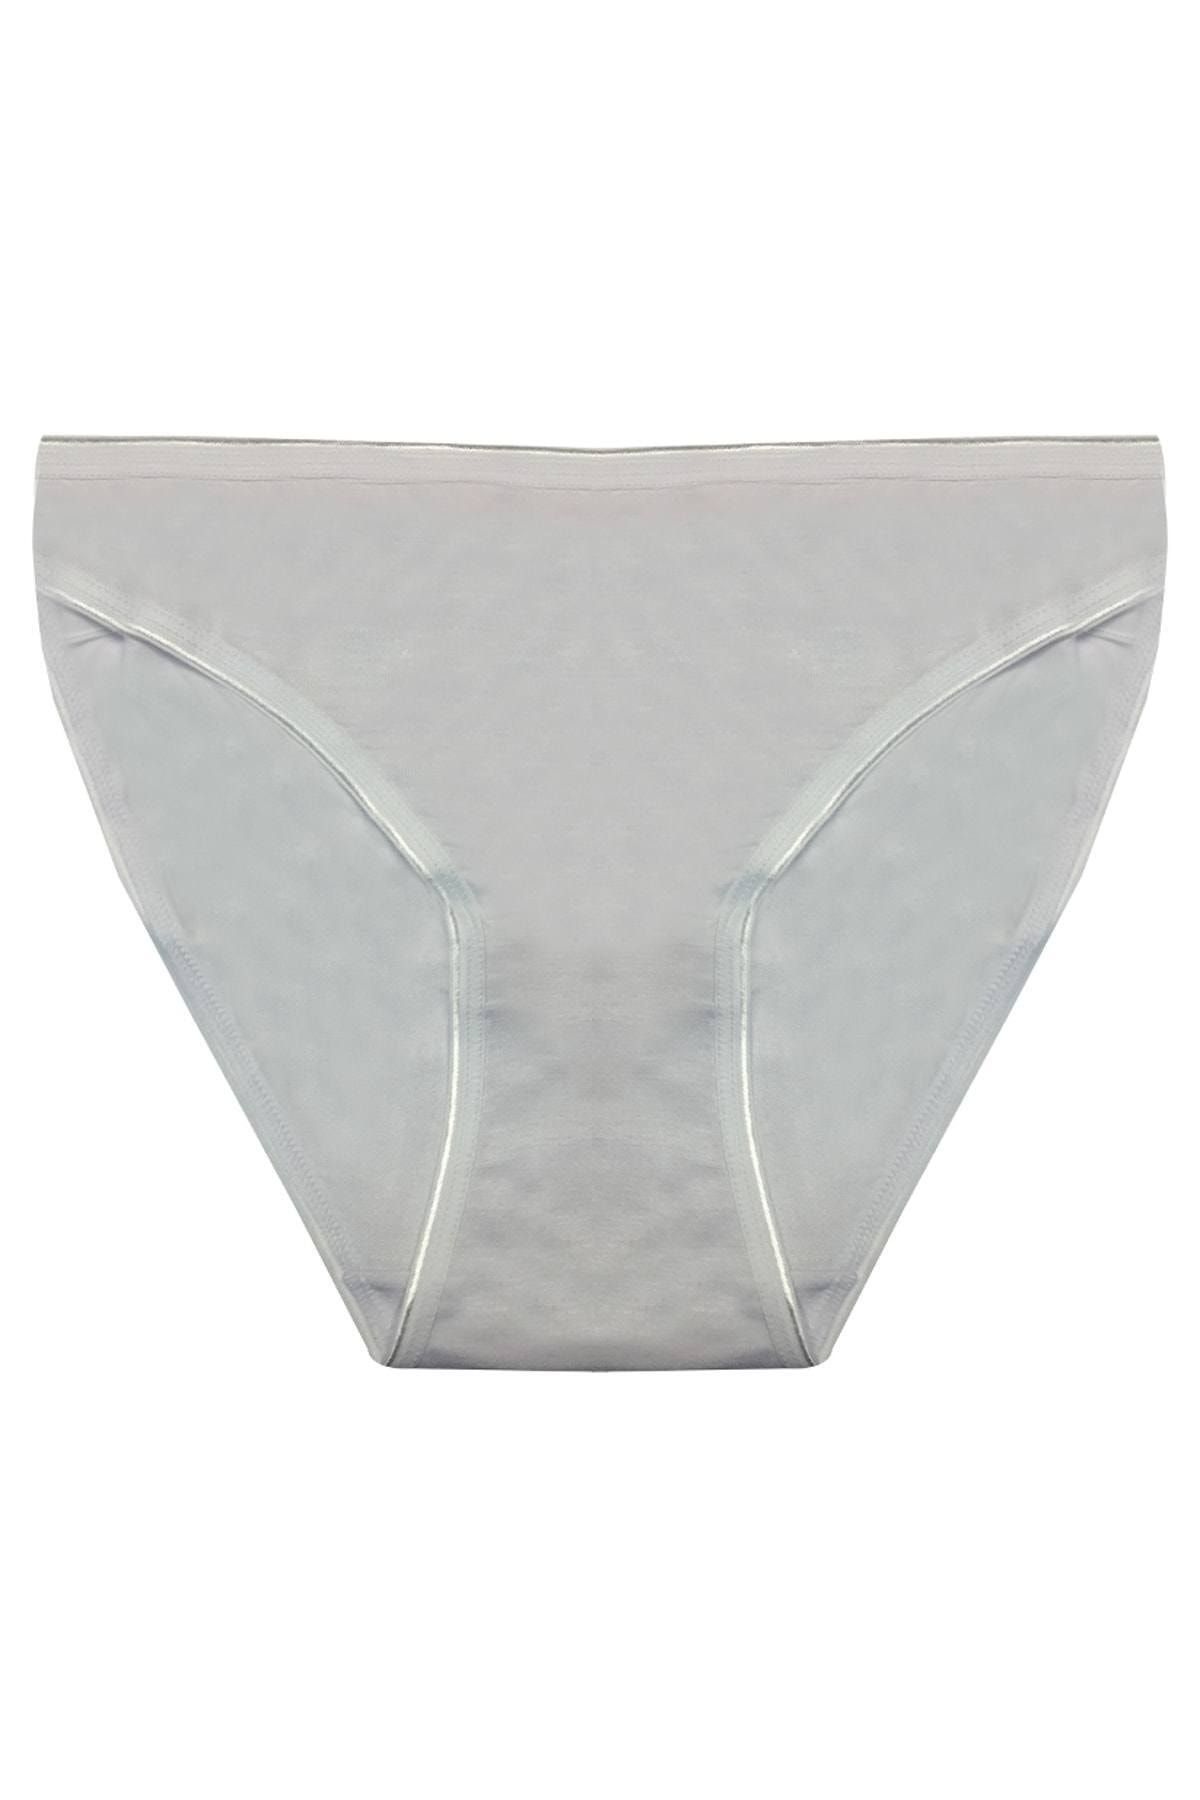 Women's Briefs  In Every Color and Cut - Trendyol